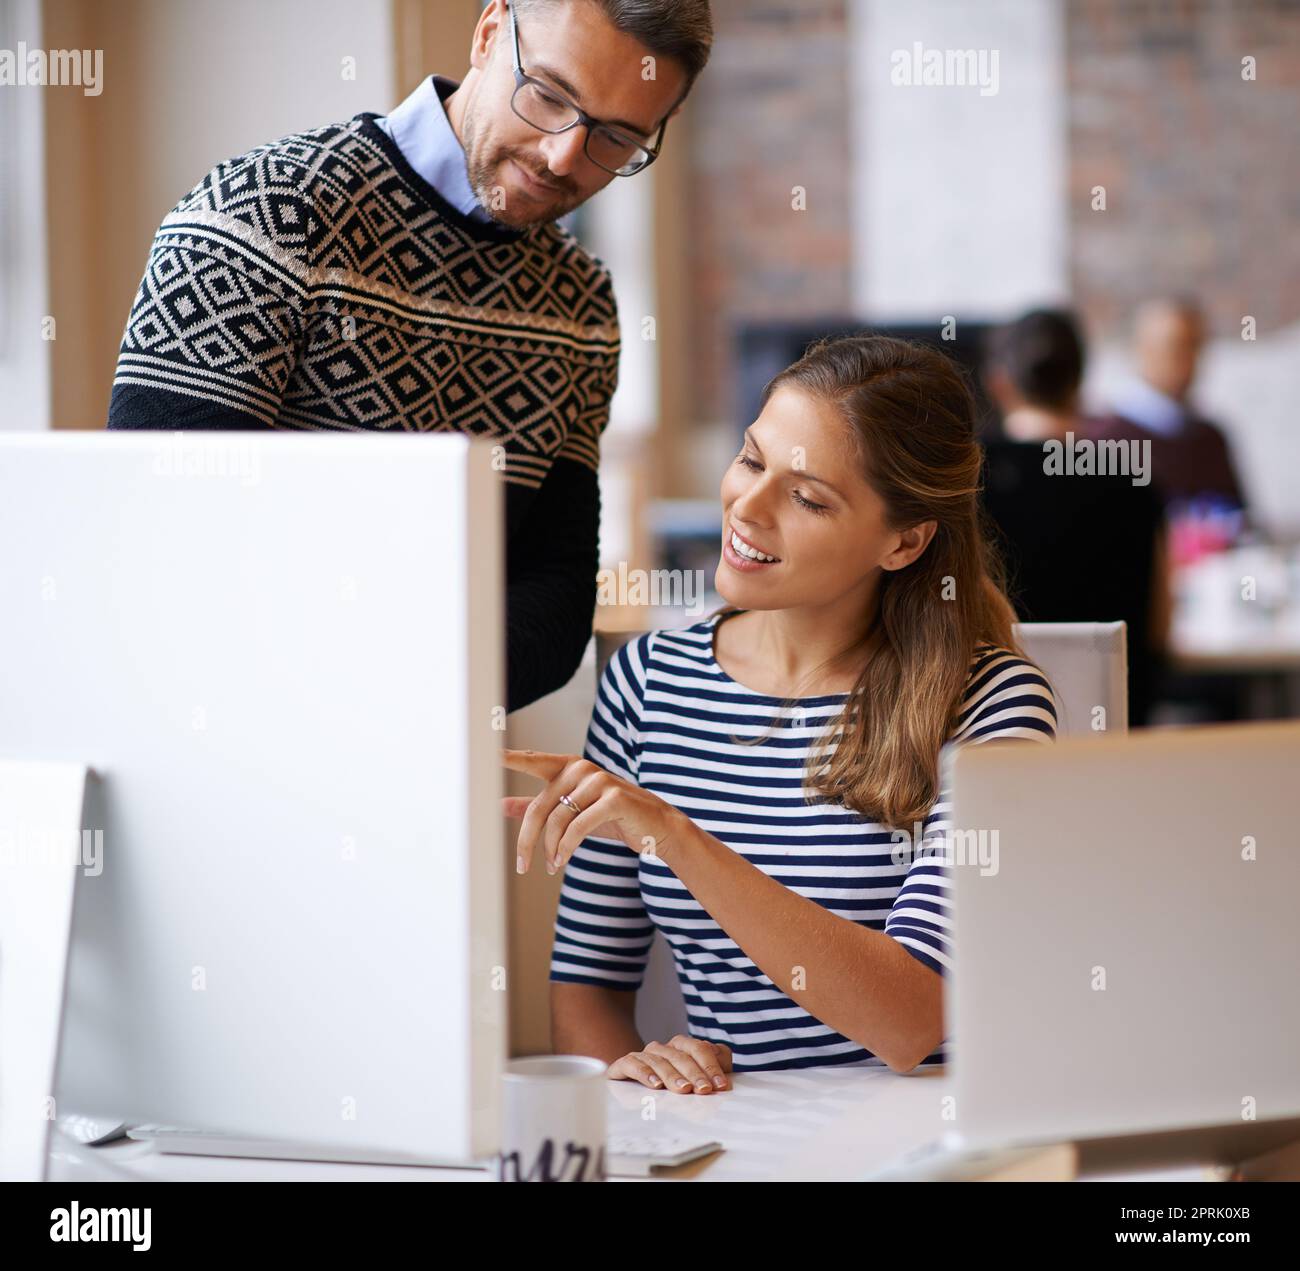 Bouncing ideas off of each other. two designers working together at a computer. Stock Photo